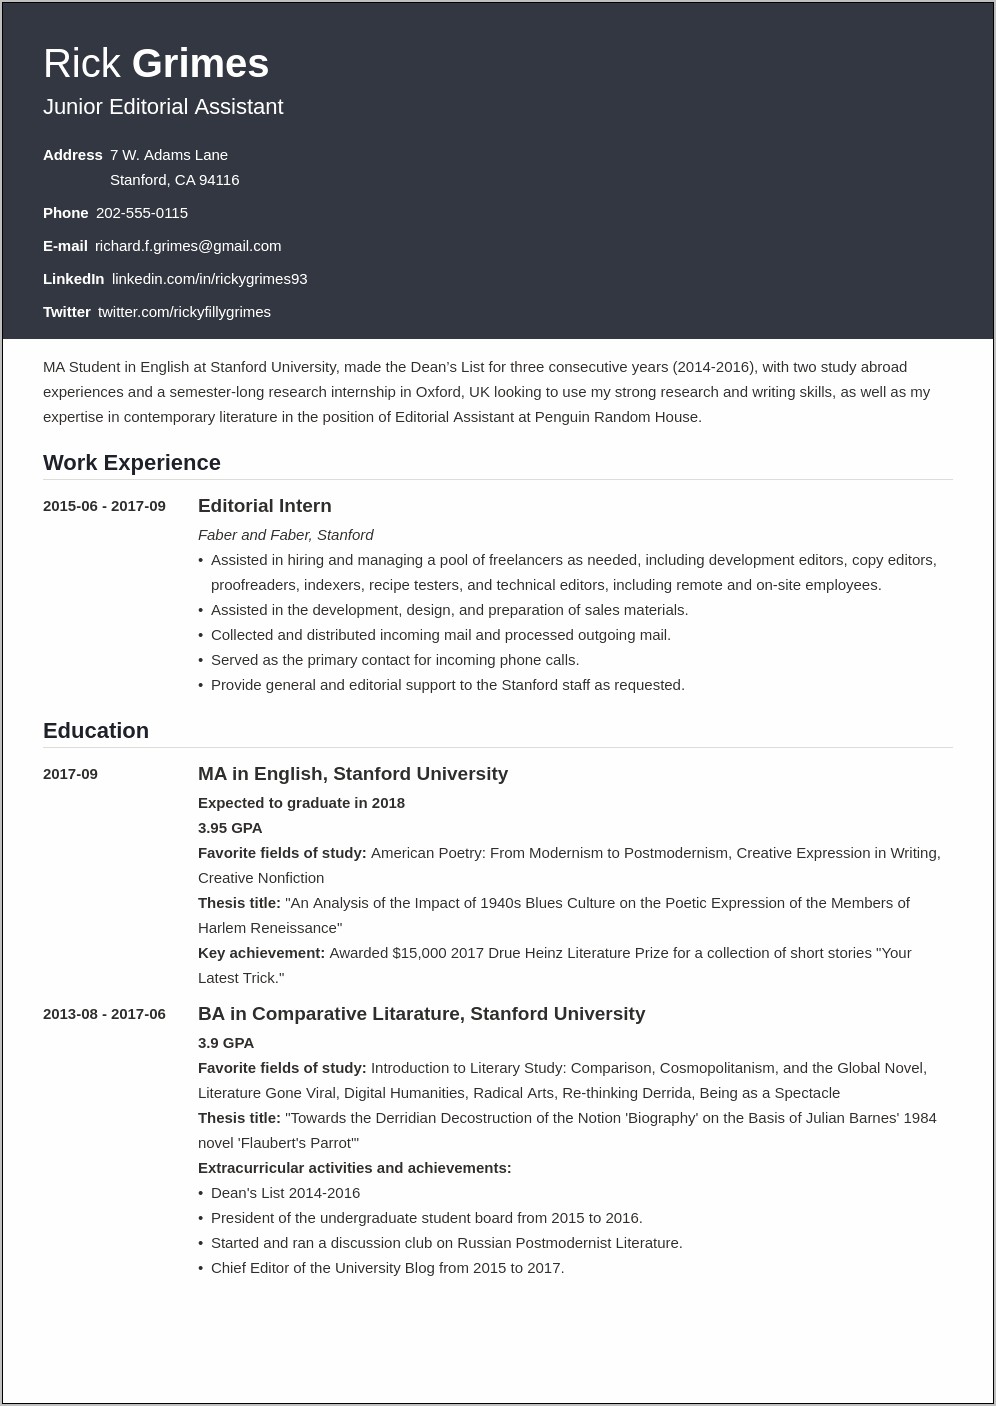 Free Resume Summary Templates For Entry Level Positions